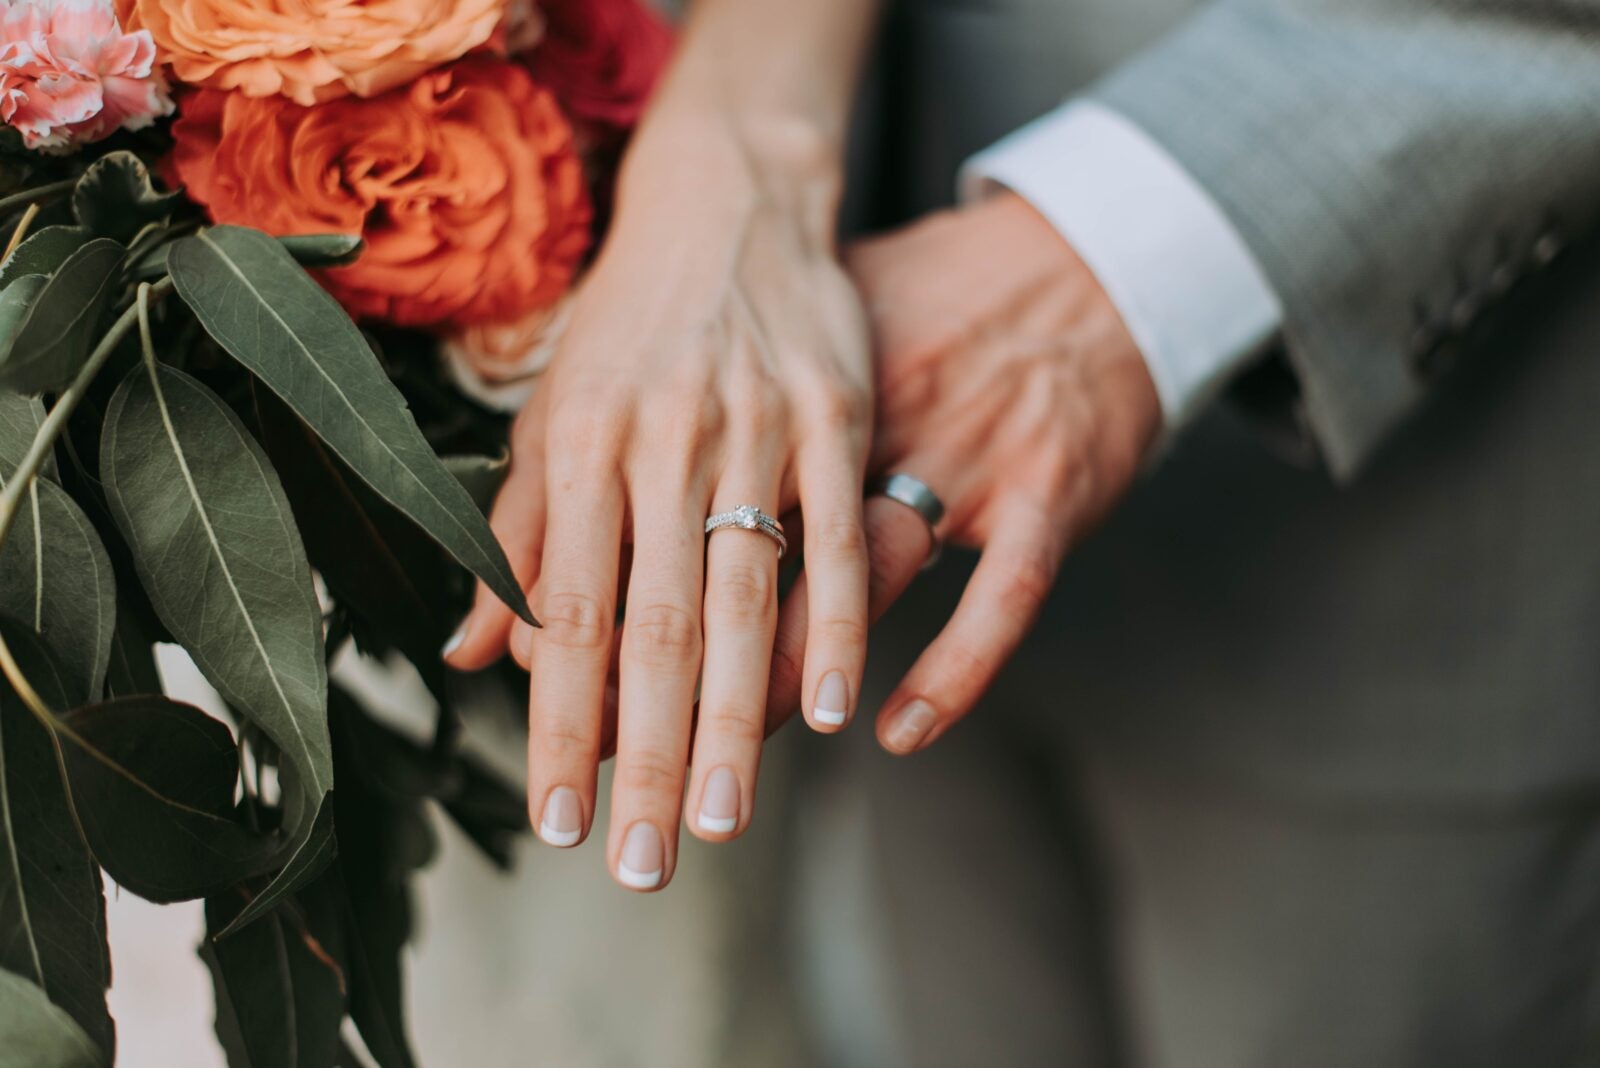 Close up of a married couple's hands showing their wedding rings.